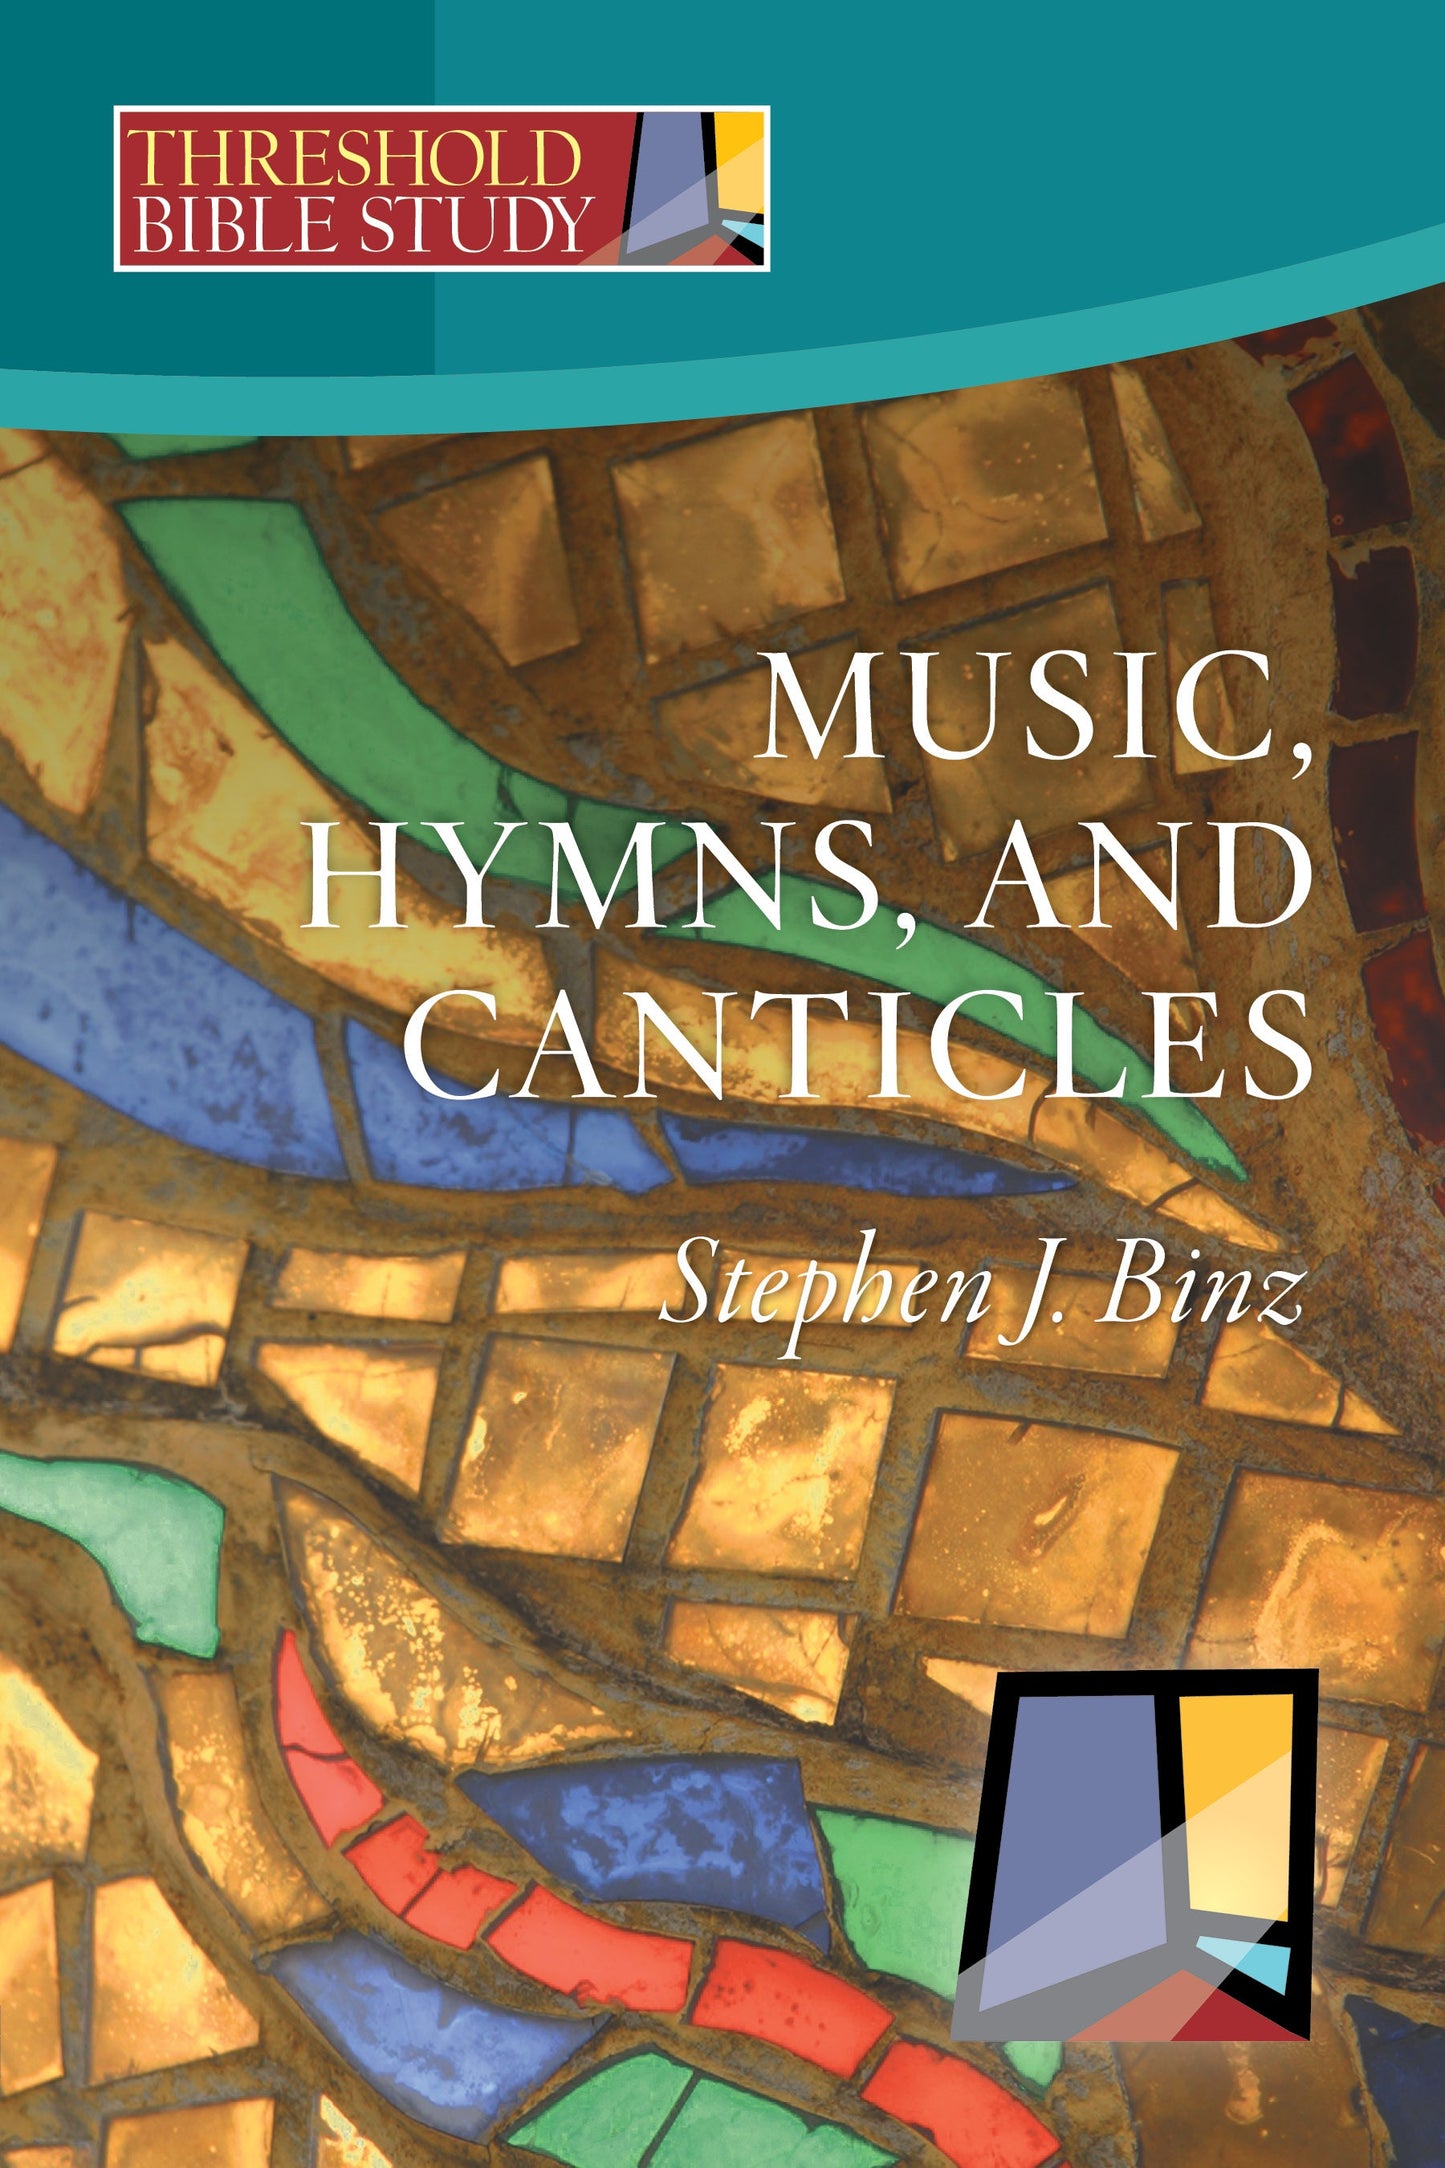 Music, Hymns, and Canticles